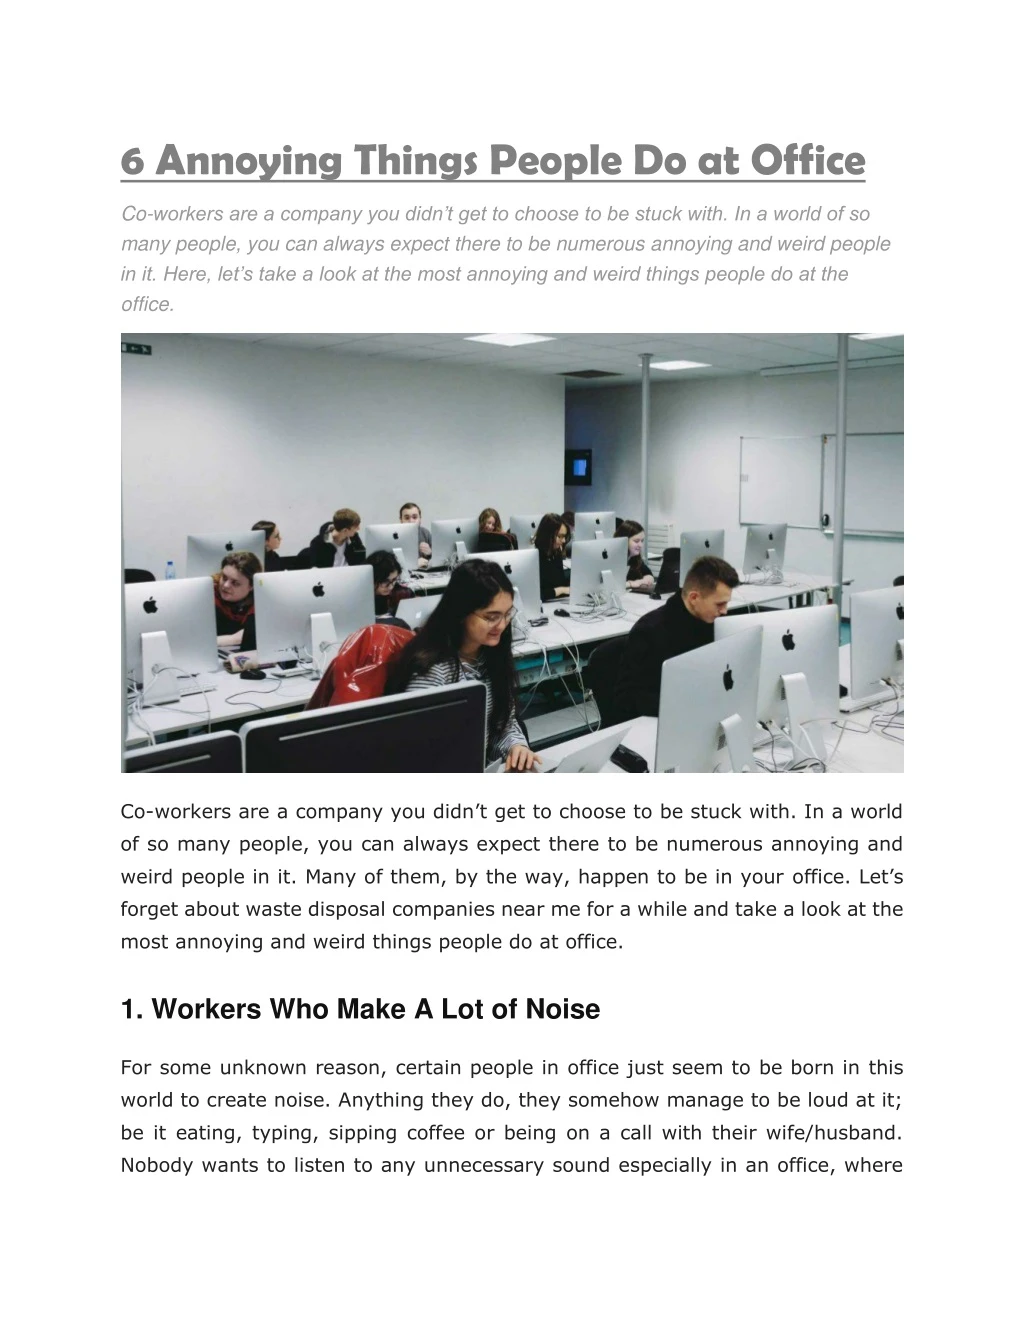 6 annoying things people do at office